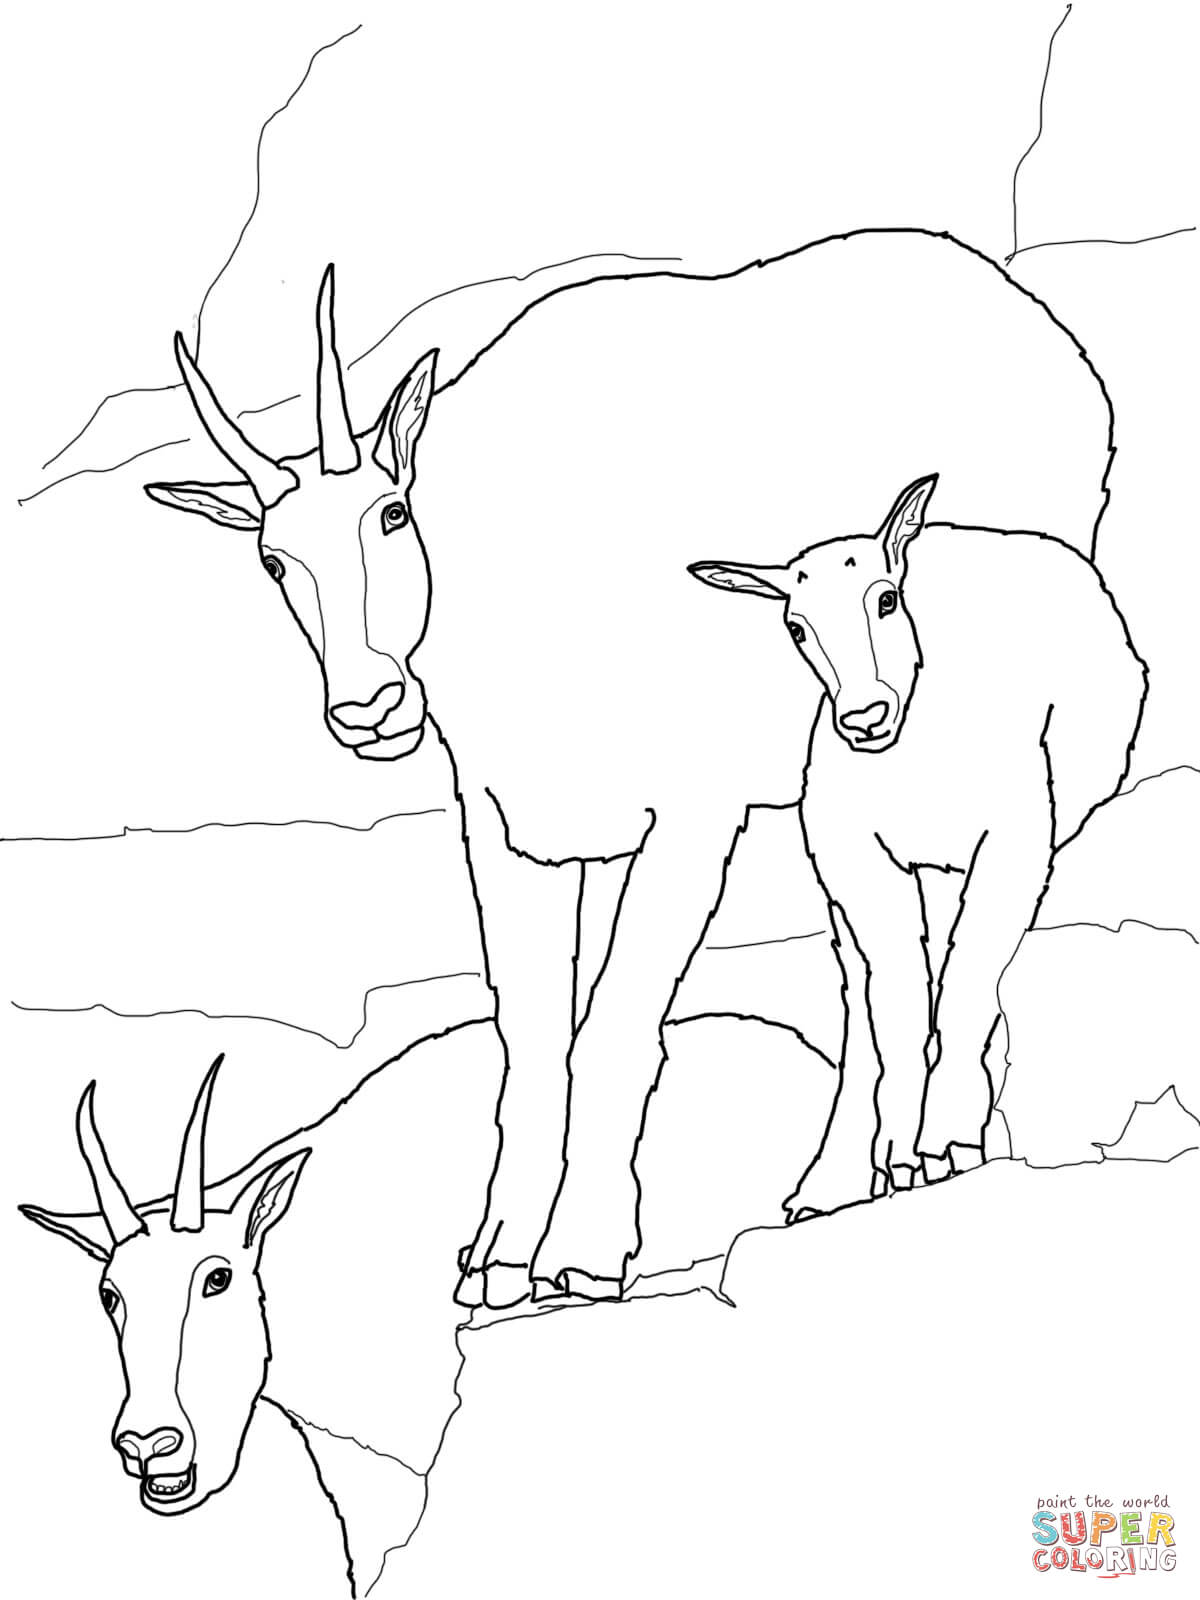 Mountain Goat coloring #10, Download drawings